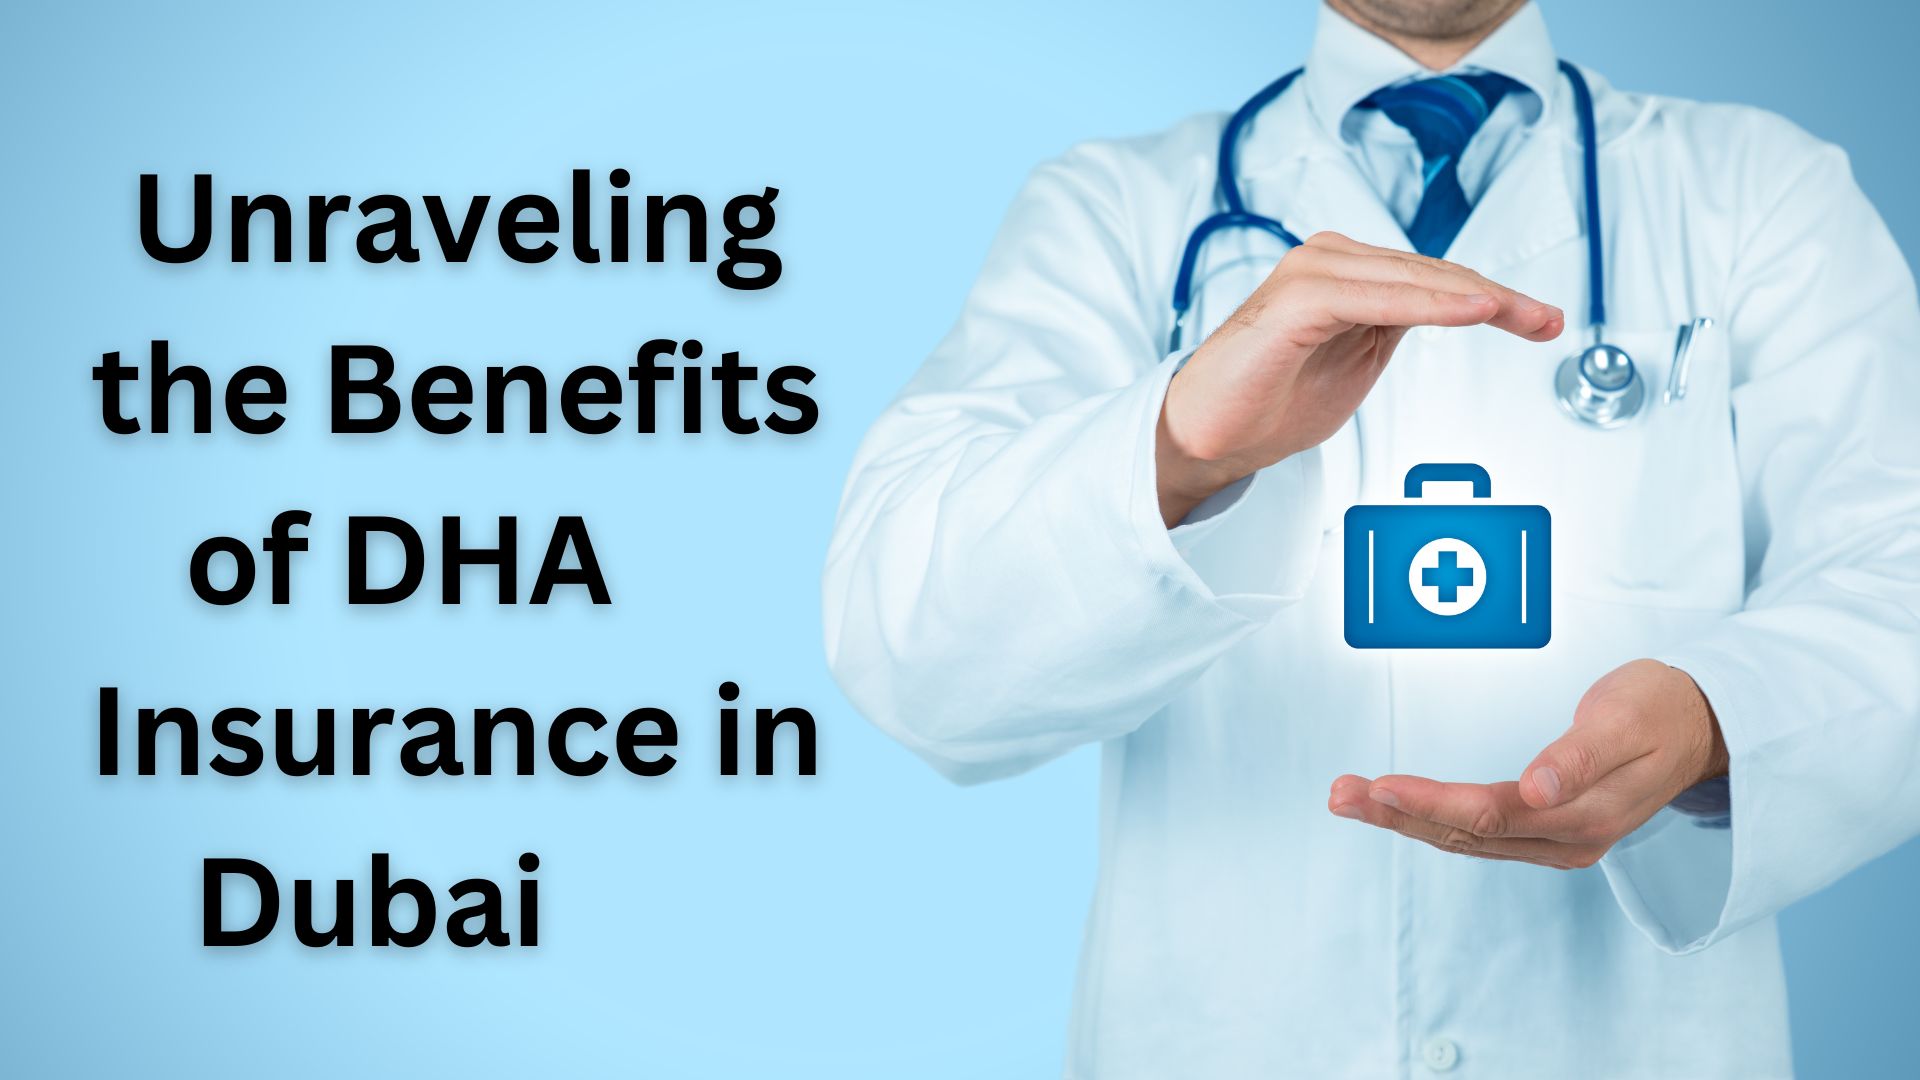 Unraveling the Benefits of DHA Insurance in Dubai